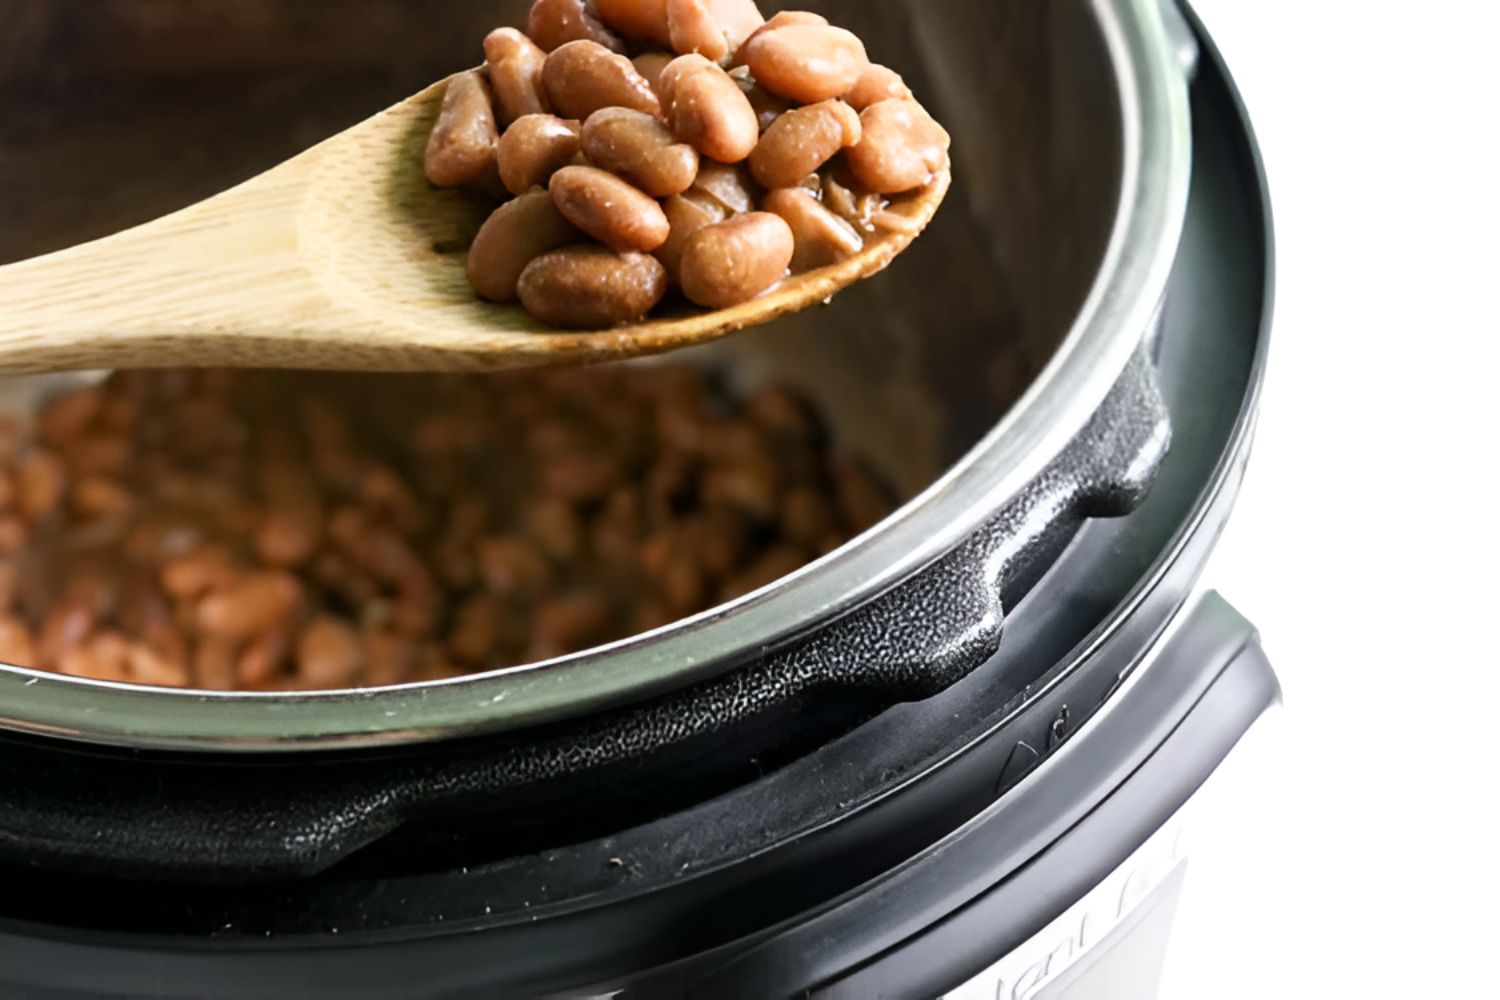 How Long Do You Cook Pinto Beans In An Electric Pressure Cooker?